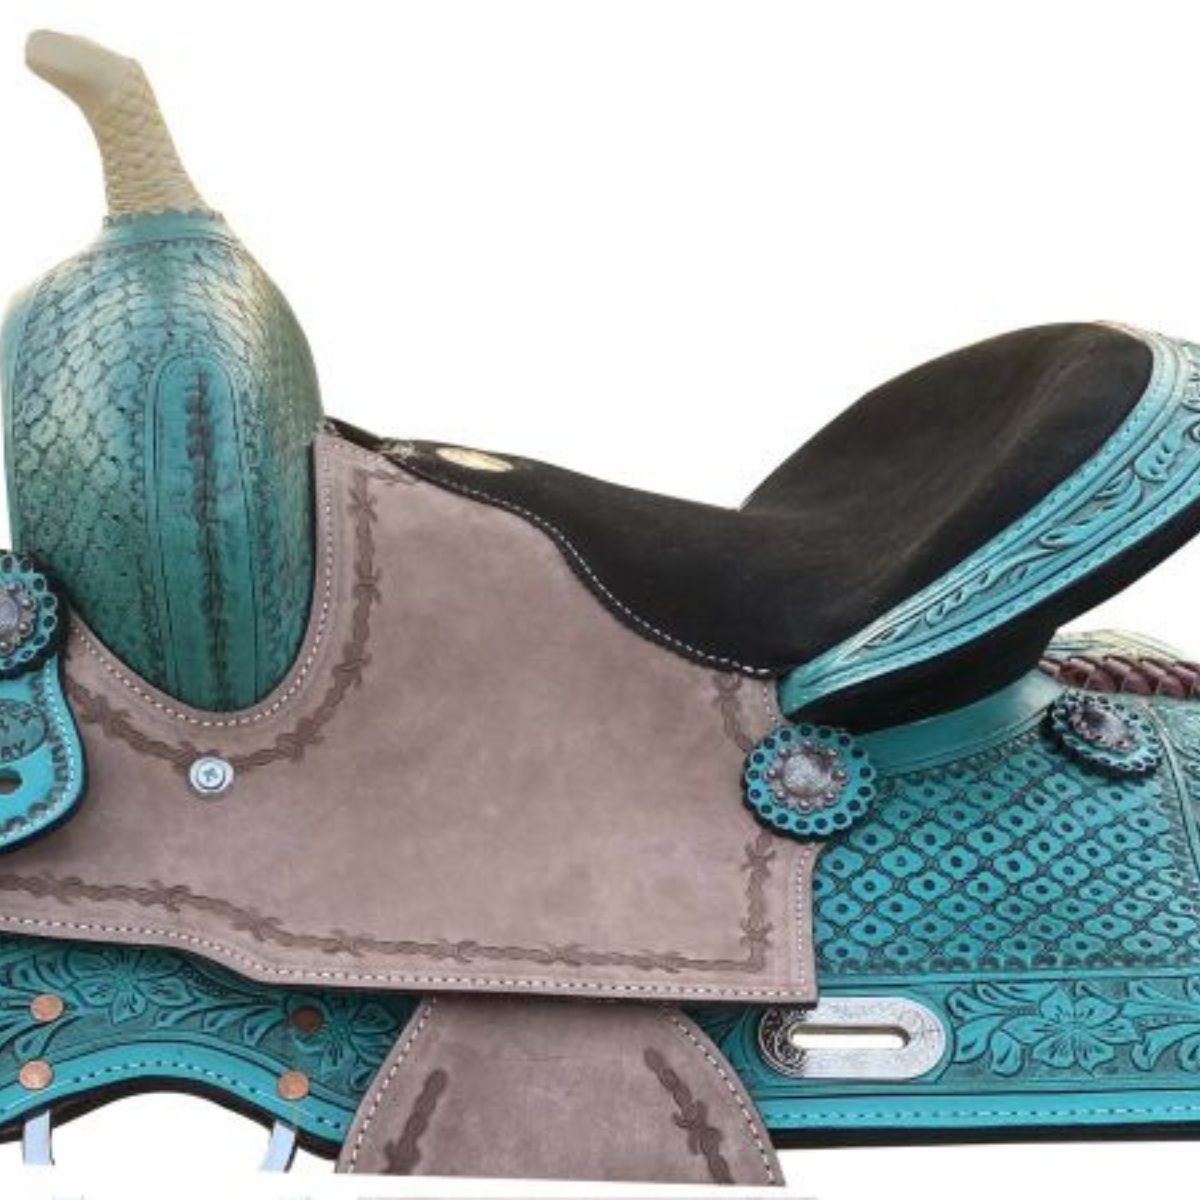 13" DOUBLE T TEAL PONY/YOUTH SADDLE WITH ROUGH OUT ACCENTS - Double T Saddles